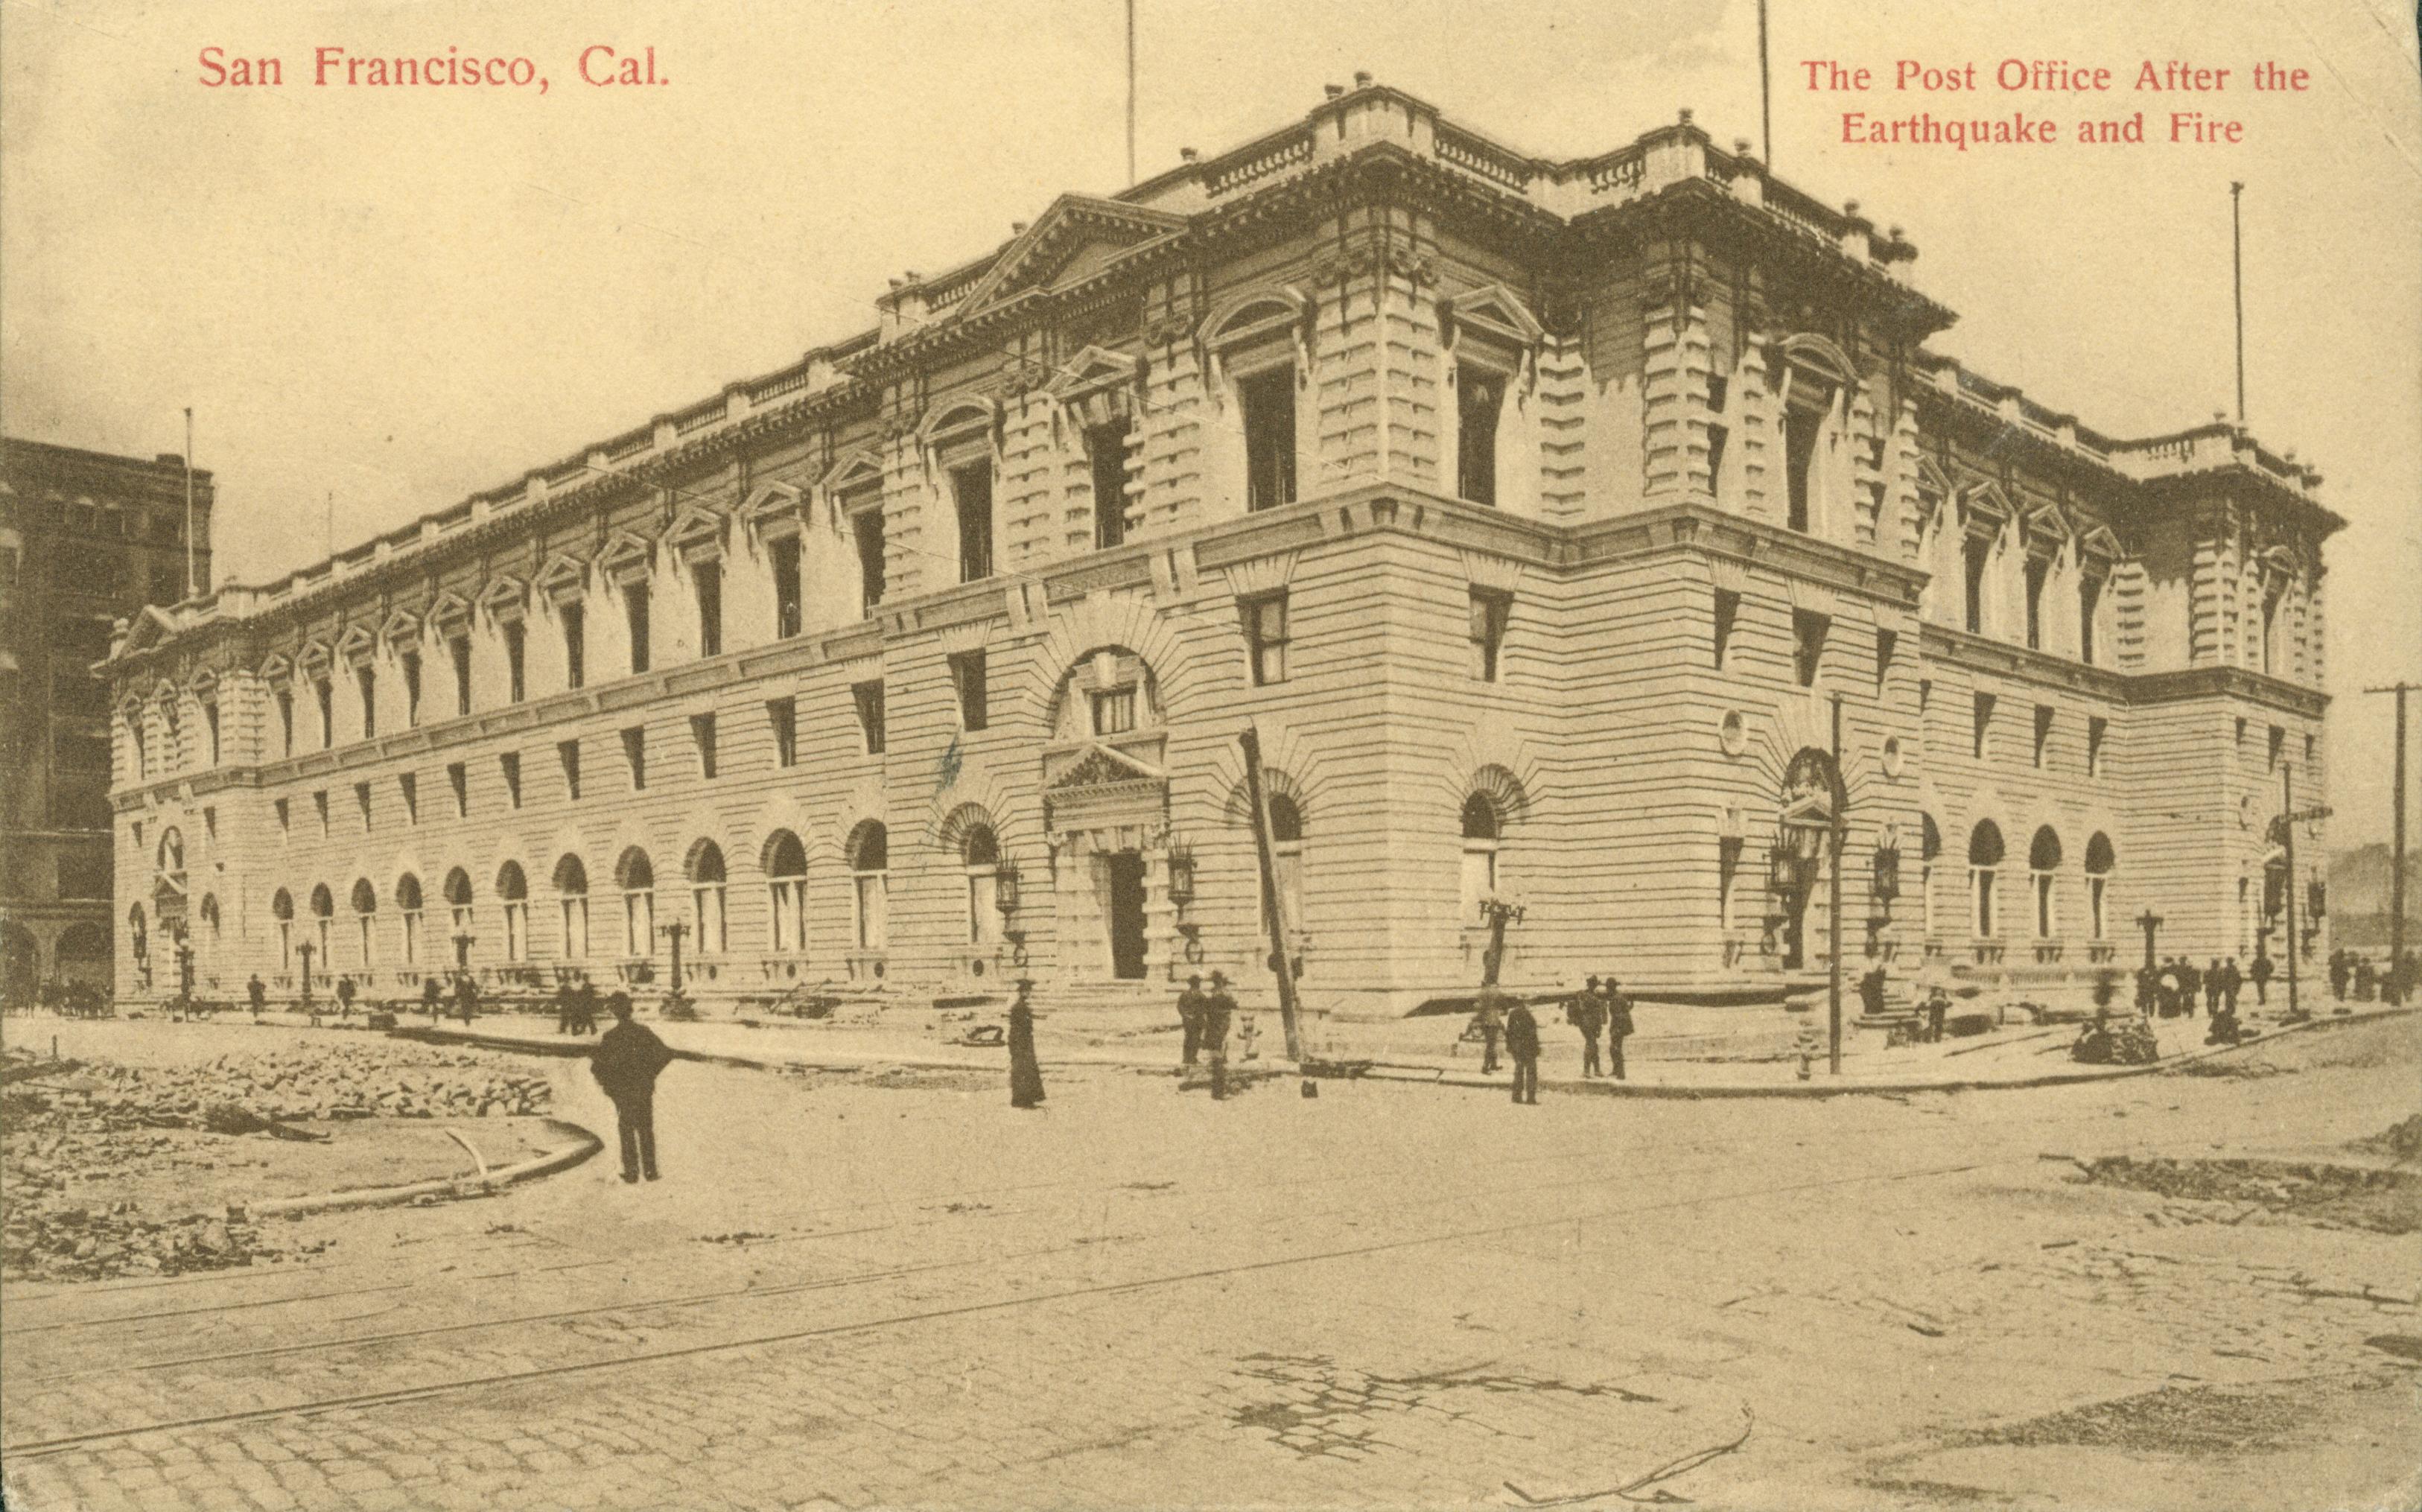 Photo of the Post Office after the earthquake and fire, still standing.